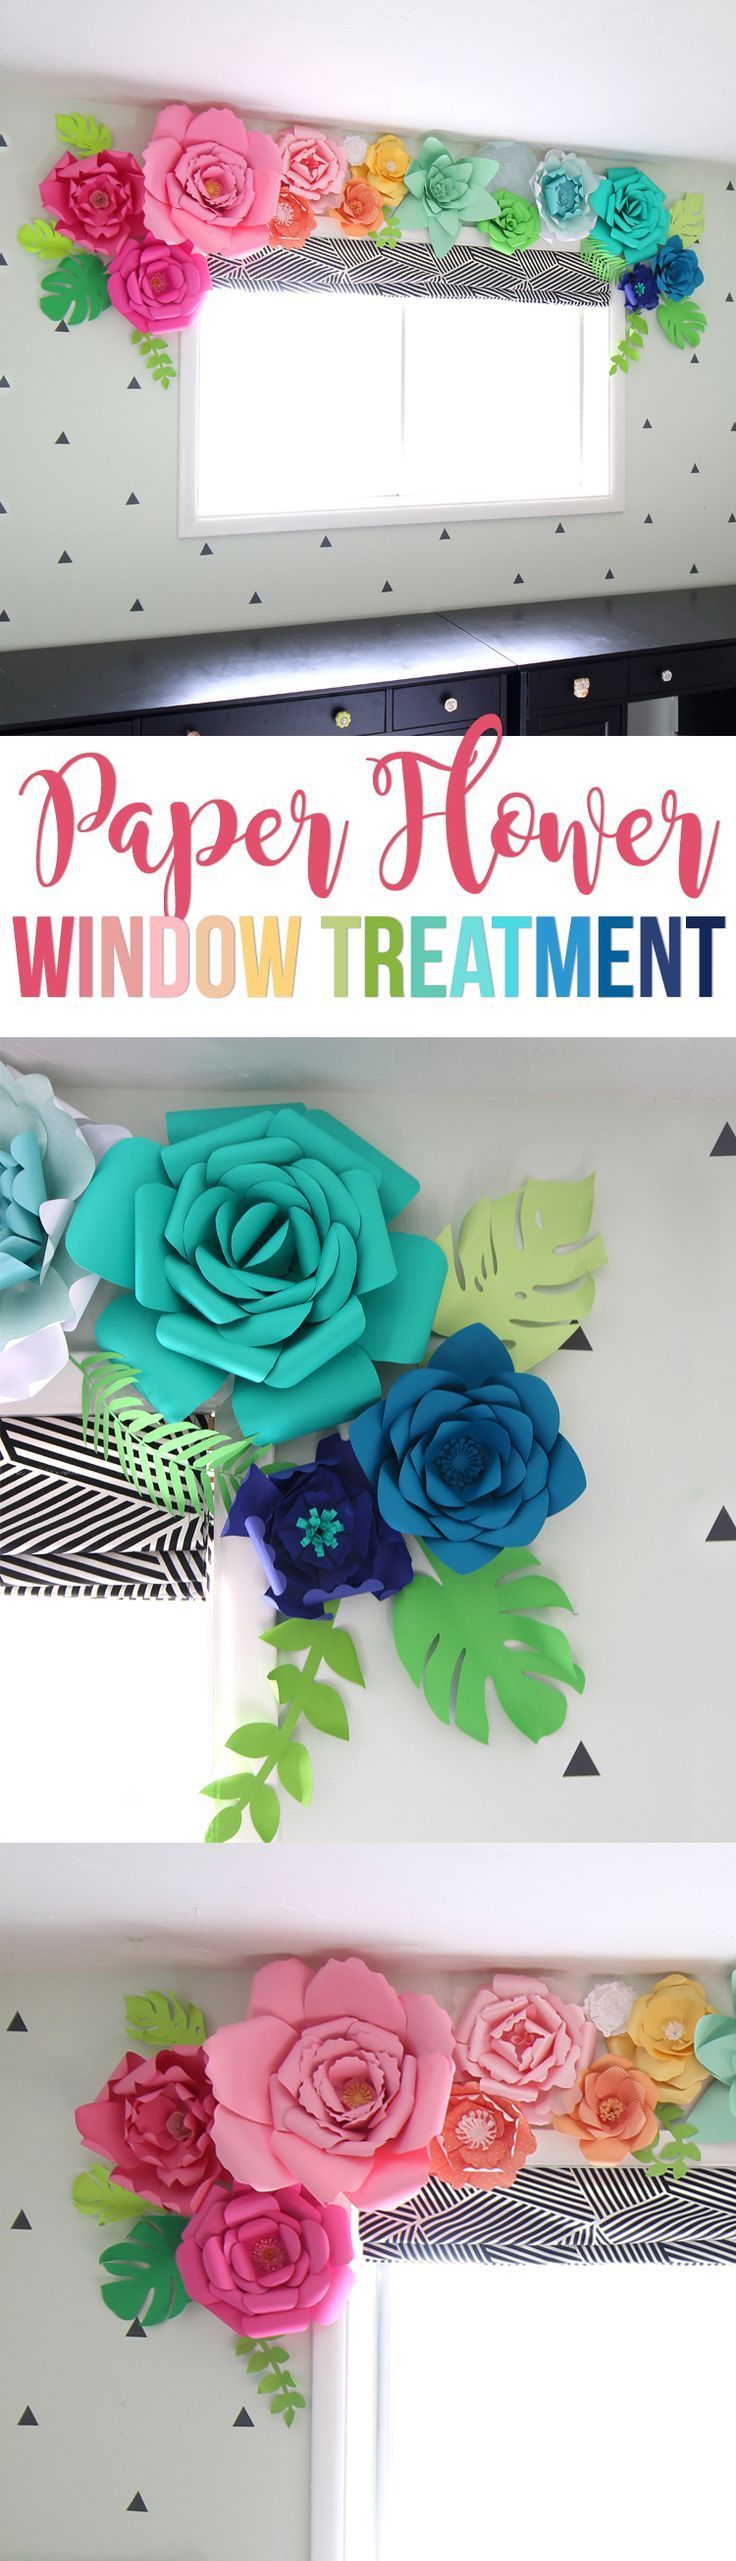 Create a whimsical, colorful and unique window treatment using giant paper flowers. So cute for a little girls room! Or use the